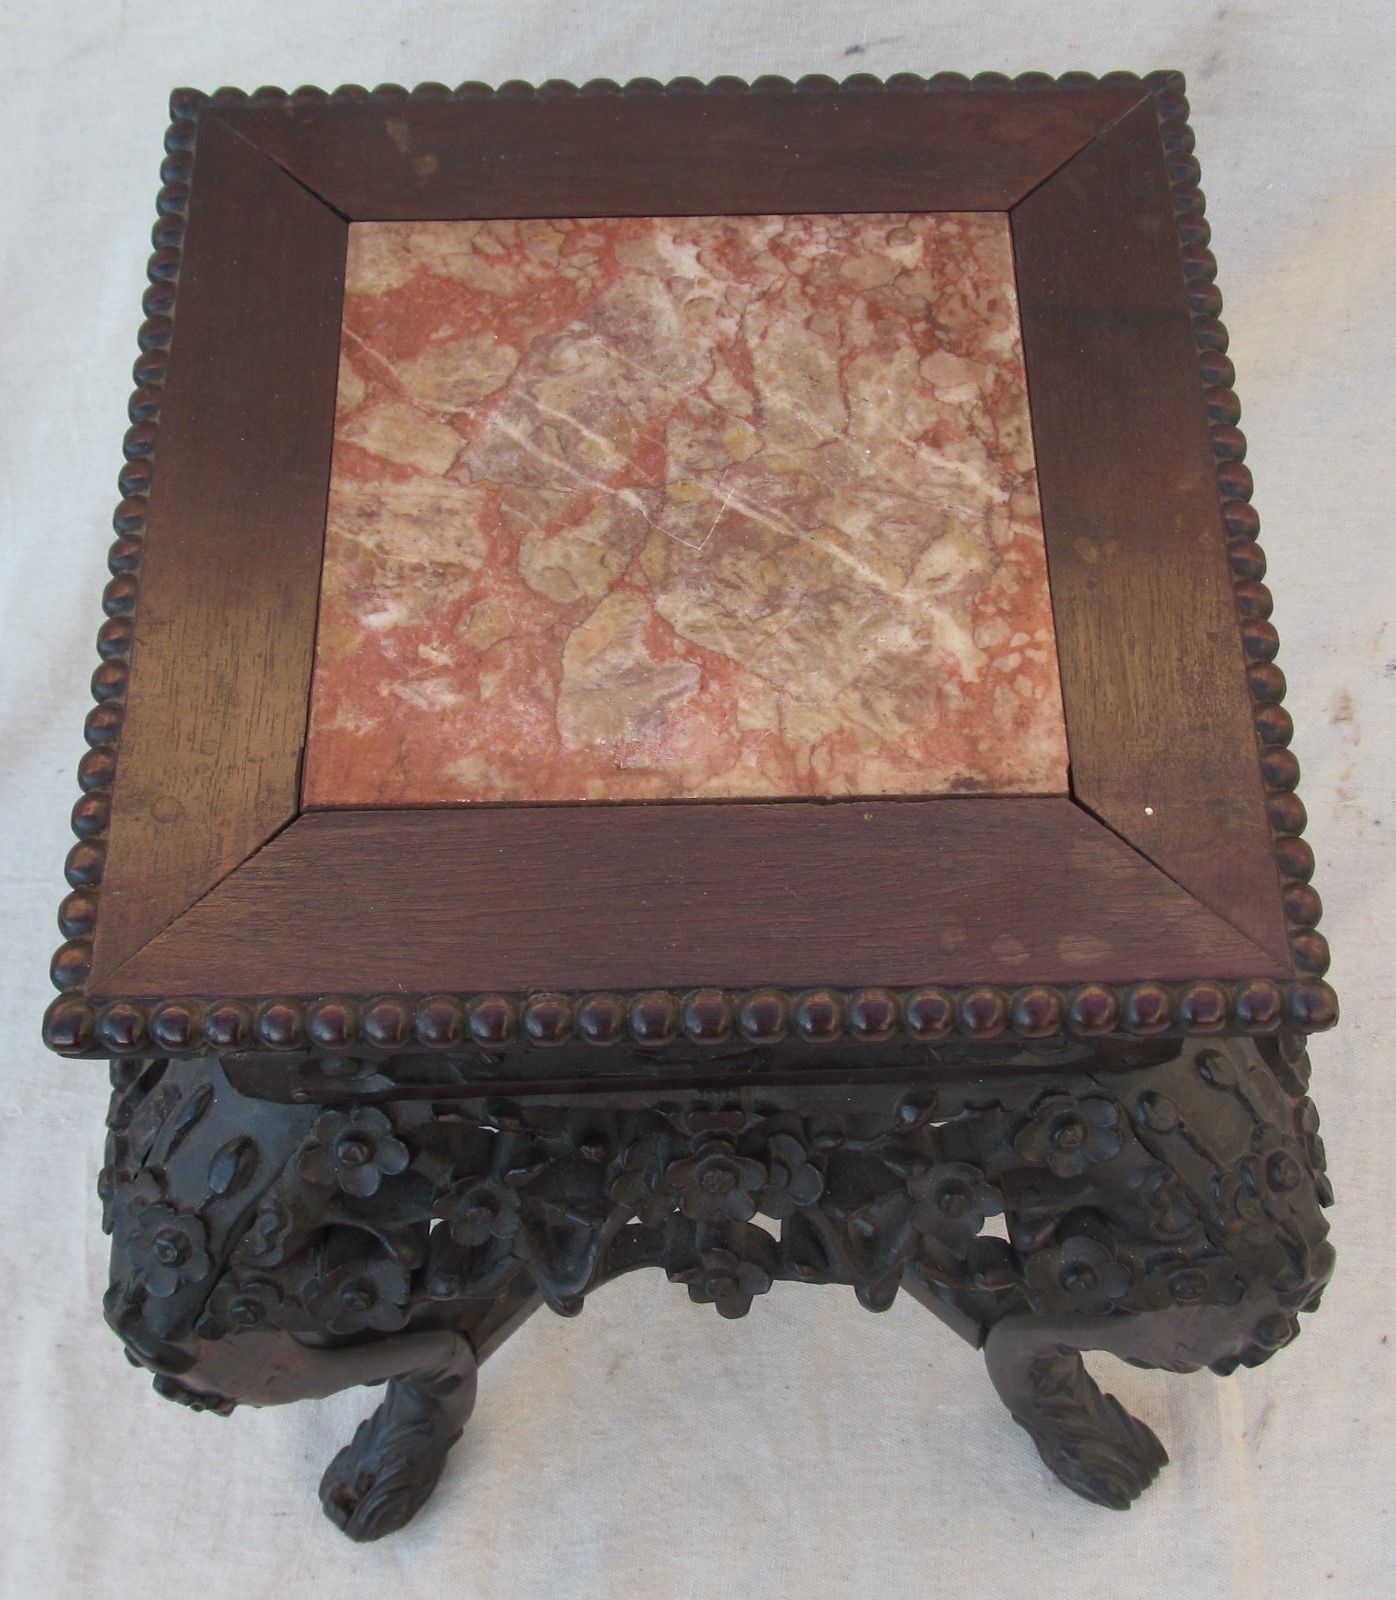 FINE 19TH CENTURY CARVED ROSEWOOD & PINK MARBLE CHINESE TABORET TABLE STAND